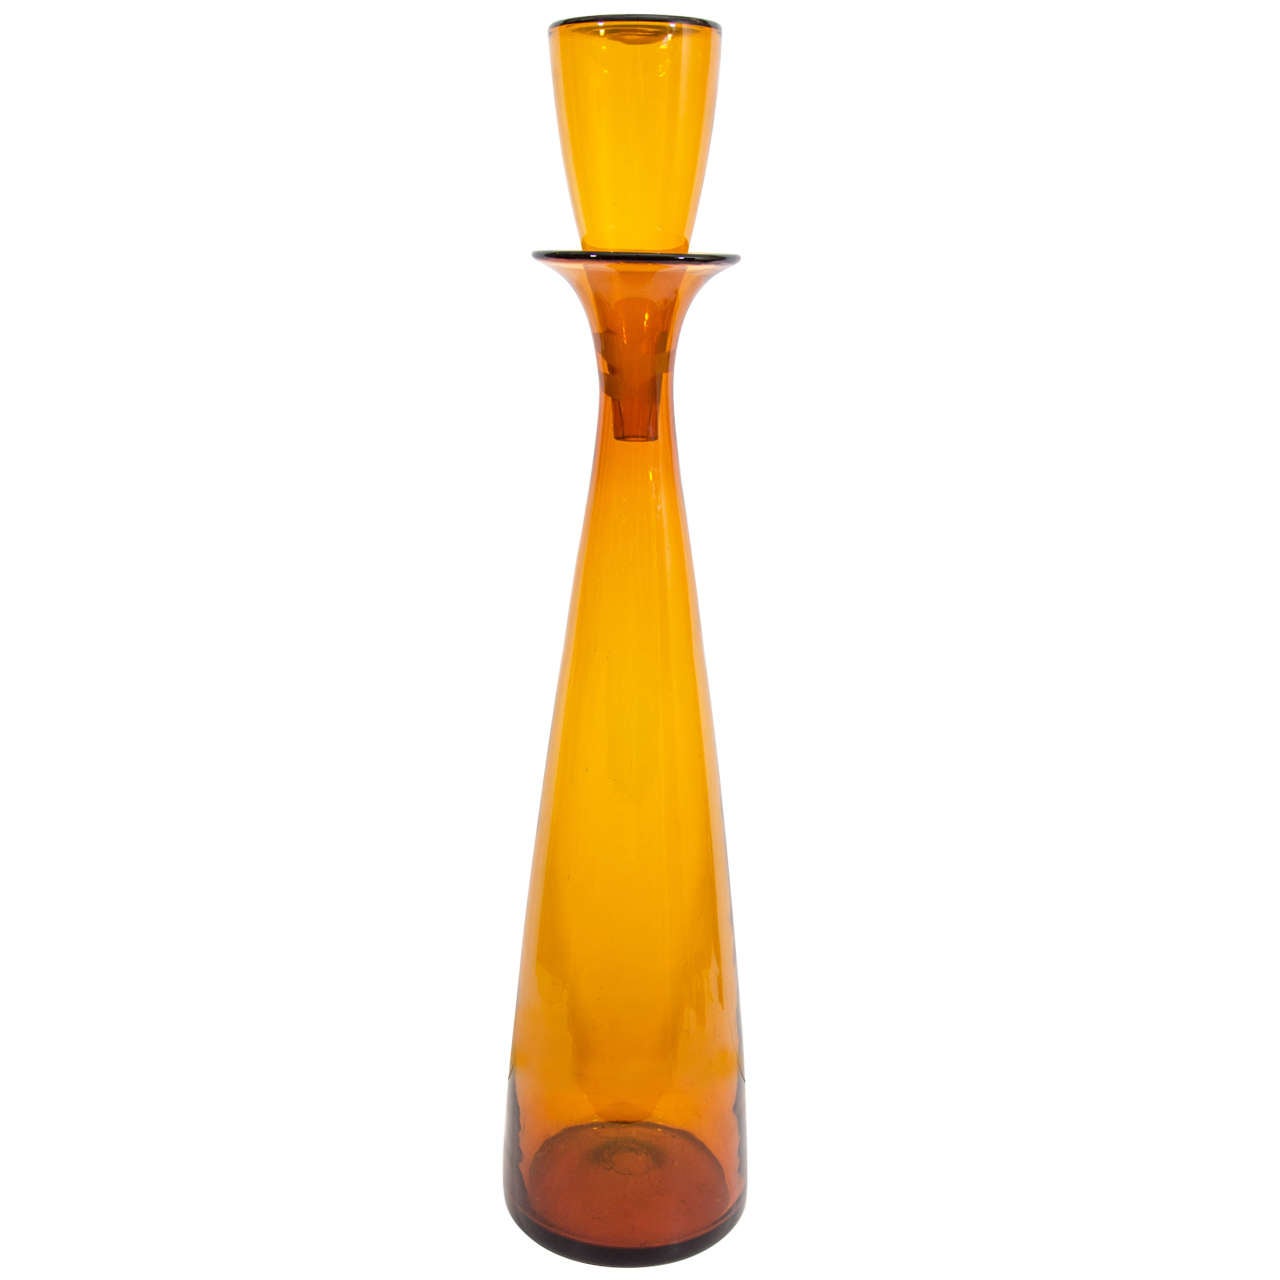 A Midcentury Large Amber Glass Decanter Designed by Wayne Husted for Blenko